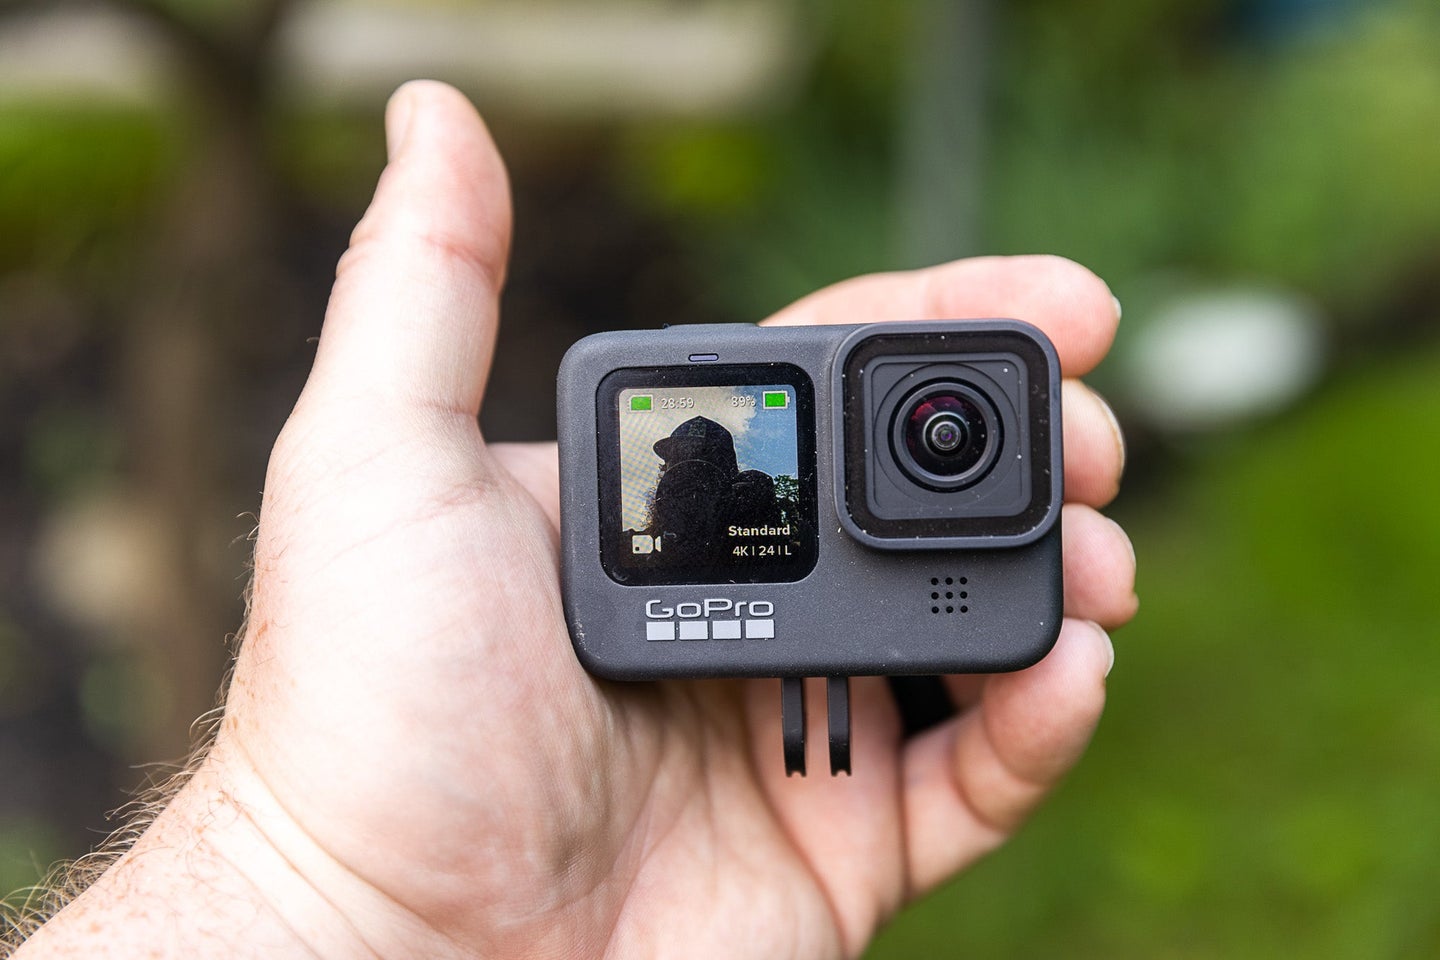 The GoPro HERO9 Black was the second most complained about camera, according to this study.